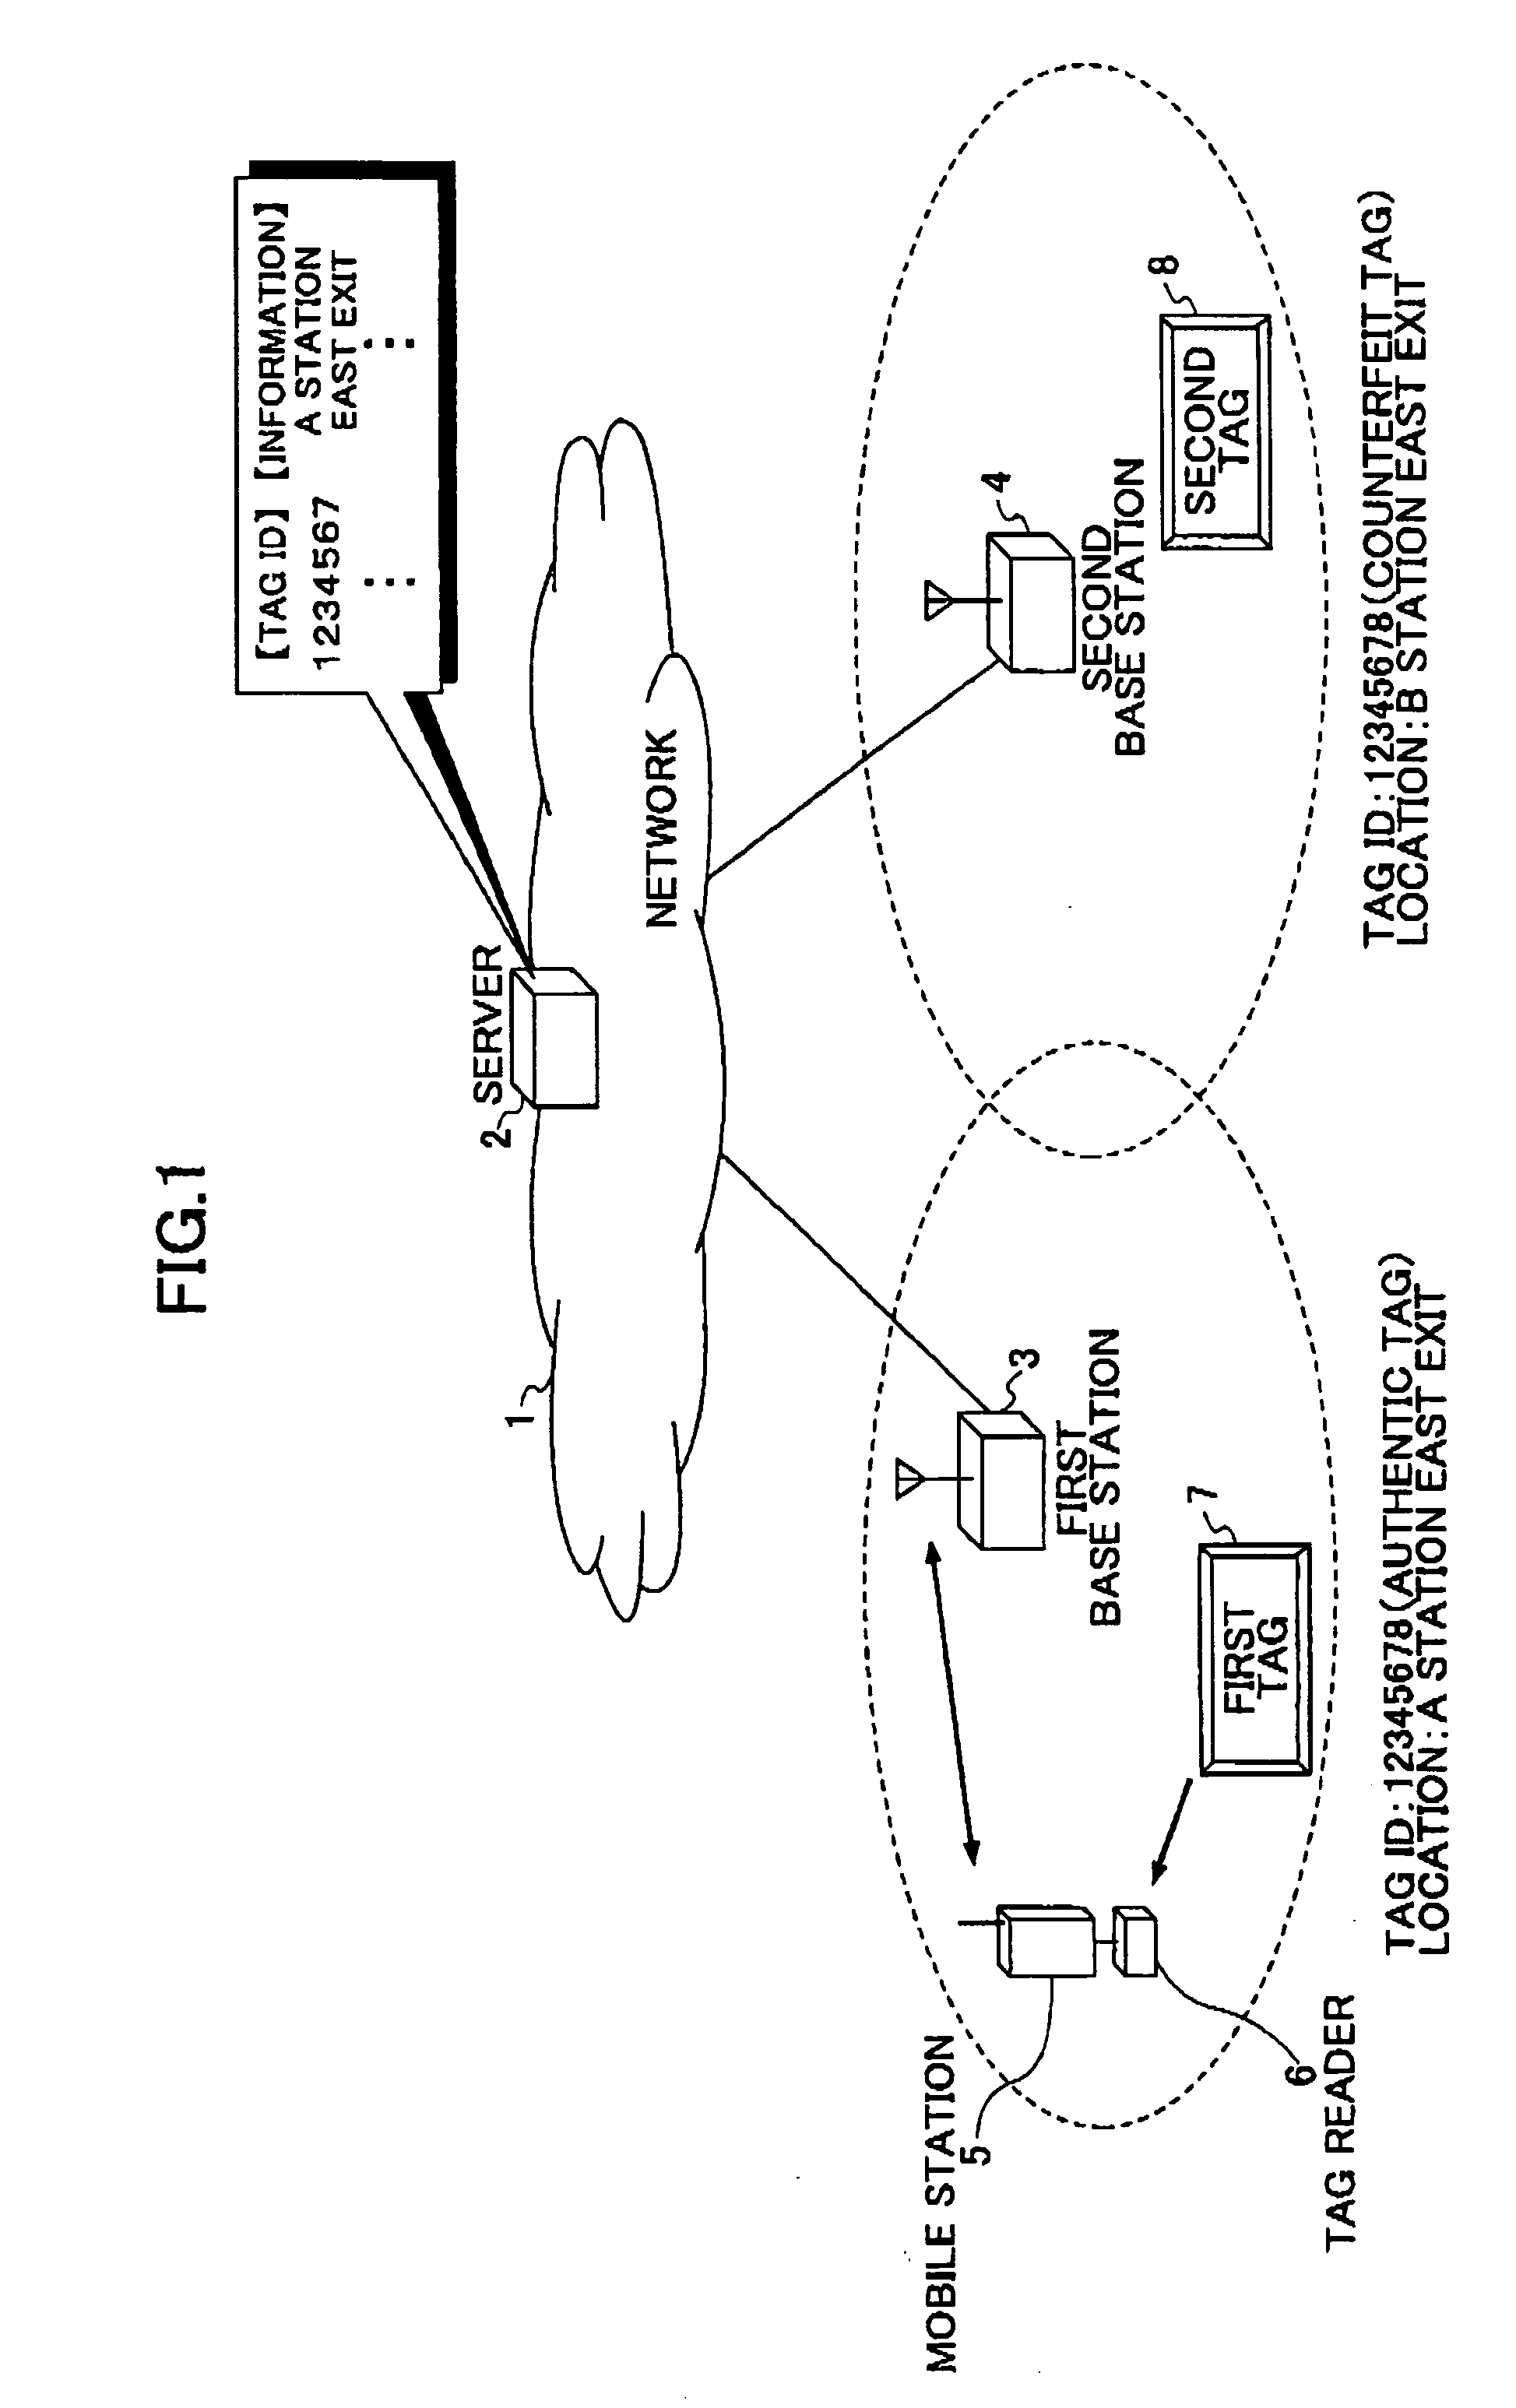 ID tag, a tag reader, ID tag transmitting and recovering methods, and a tag manager